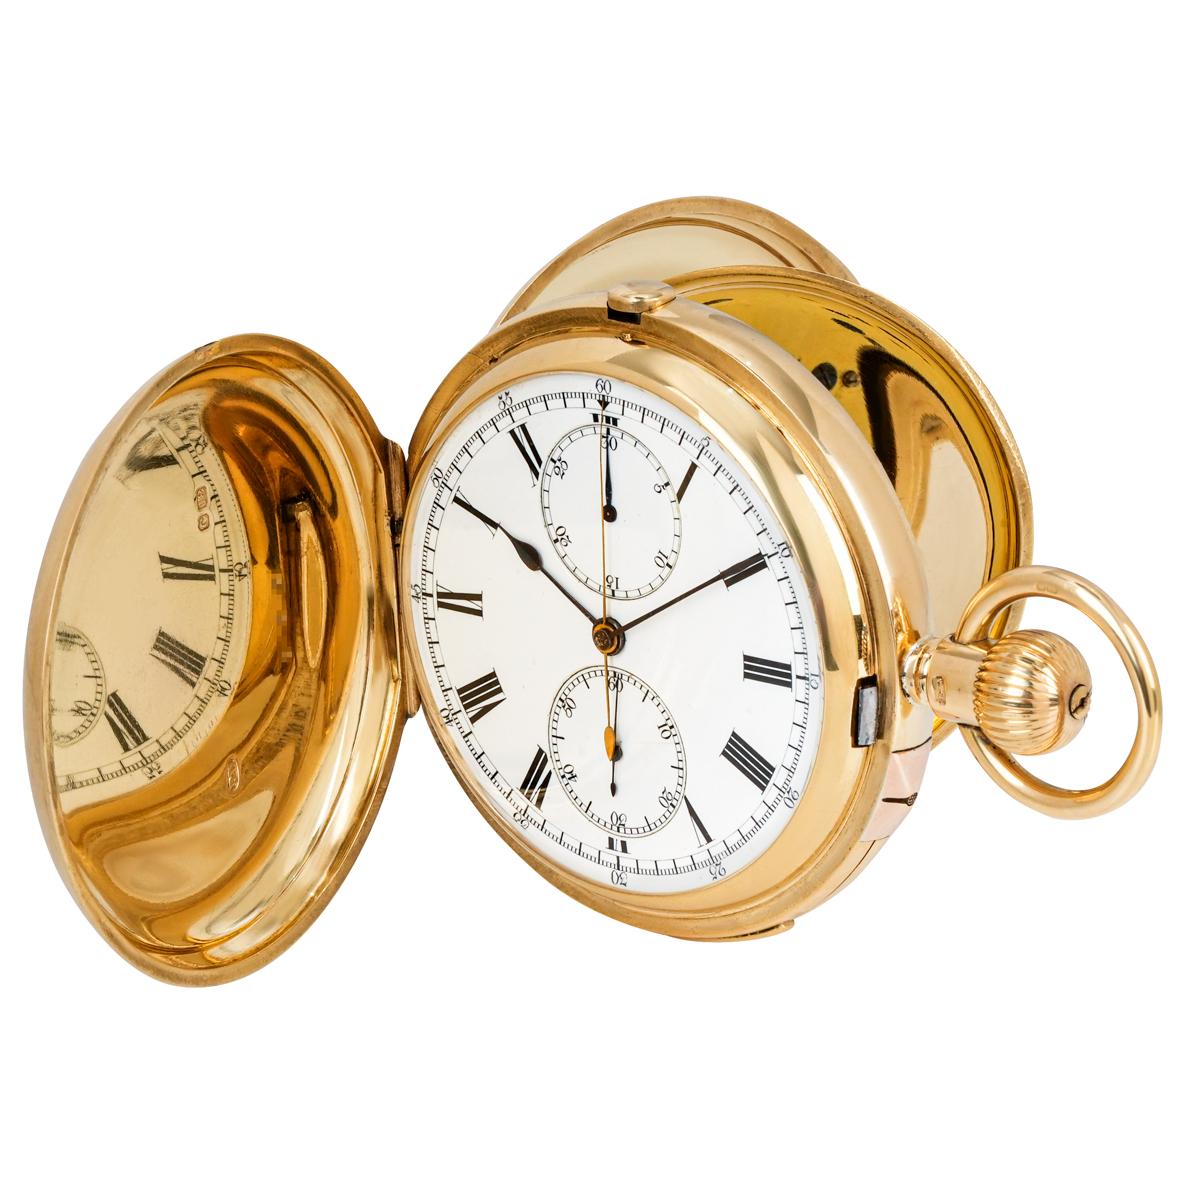 A heavy English minute repeater chronograph 18ct yellow gold keyless lever full hunter pocket watch, C1898.

Dial: The white enamel with Roman numerals, outer minute track with Arabic numerals. The subsidiary seconds dial is located at six o'clock